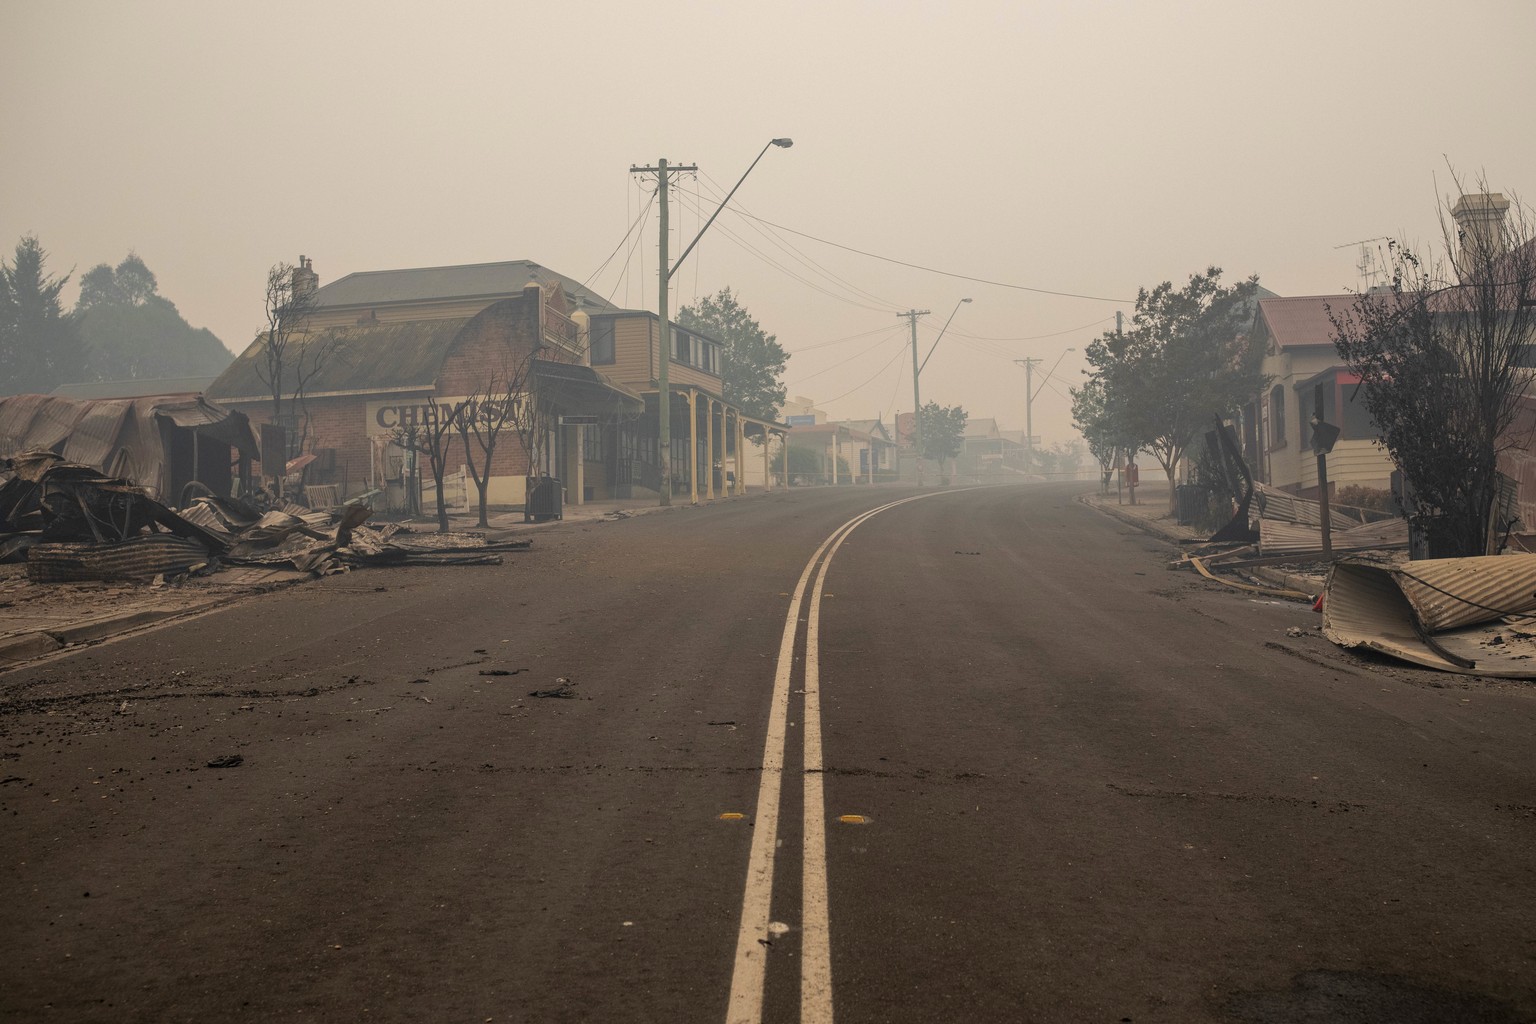 epa08096849 The rubble of buildings sits on the ground after they were destroyed by fire in Cobargo, New South Wales, Australia, 01 January 2020. EPA/SEAN DAVEY NO ARCHIVING AUSTRALIA AND NEW ZEALAND  ...